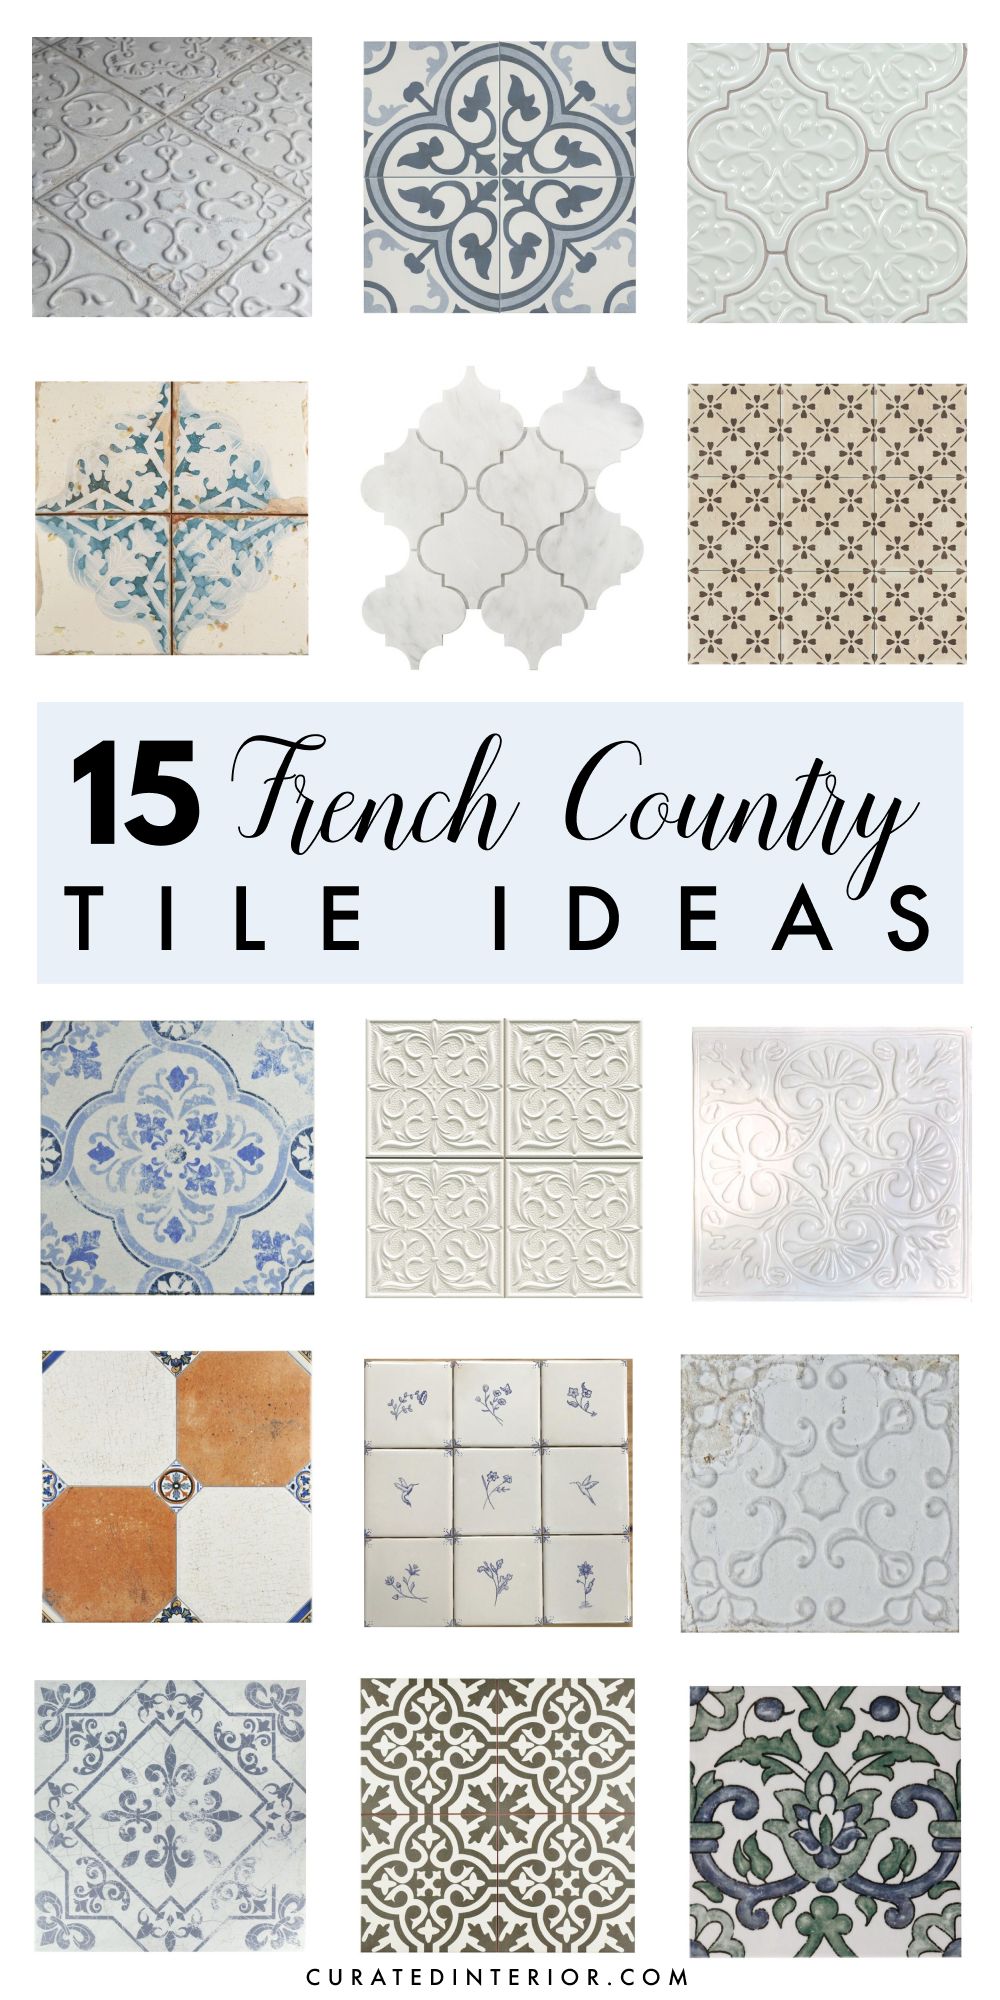 15 French Country Tiles Ideas